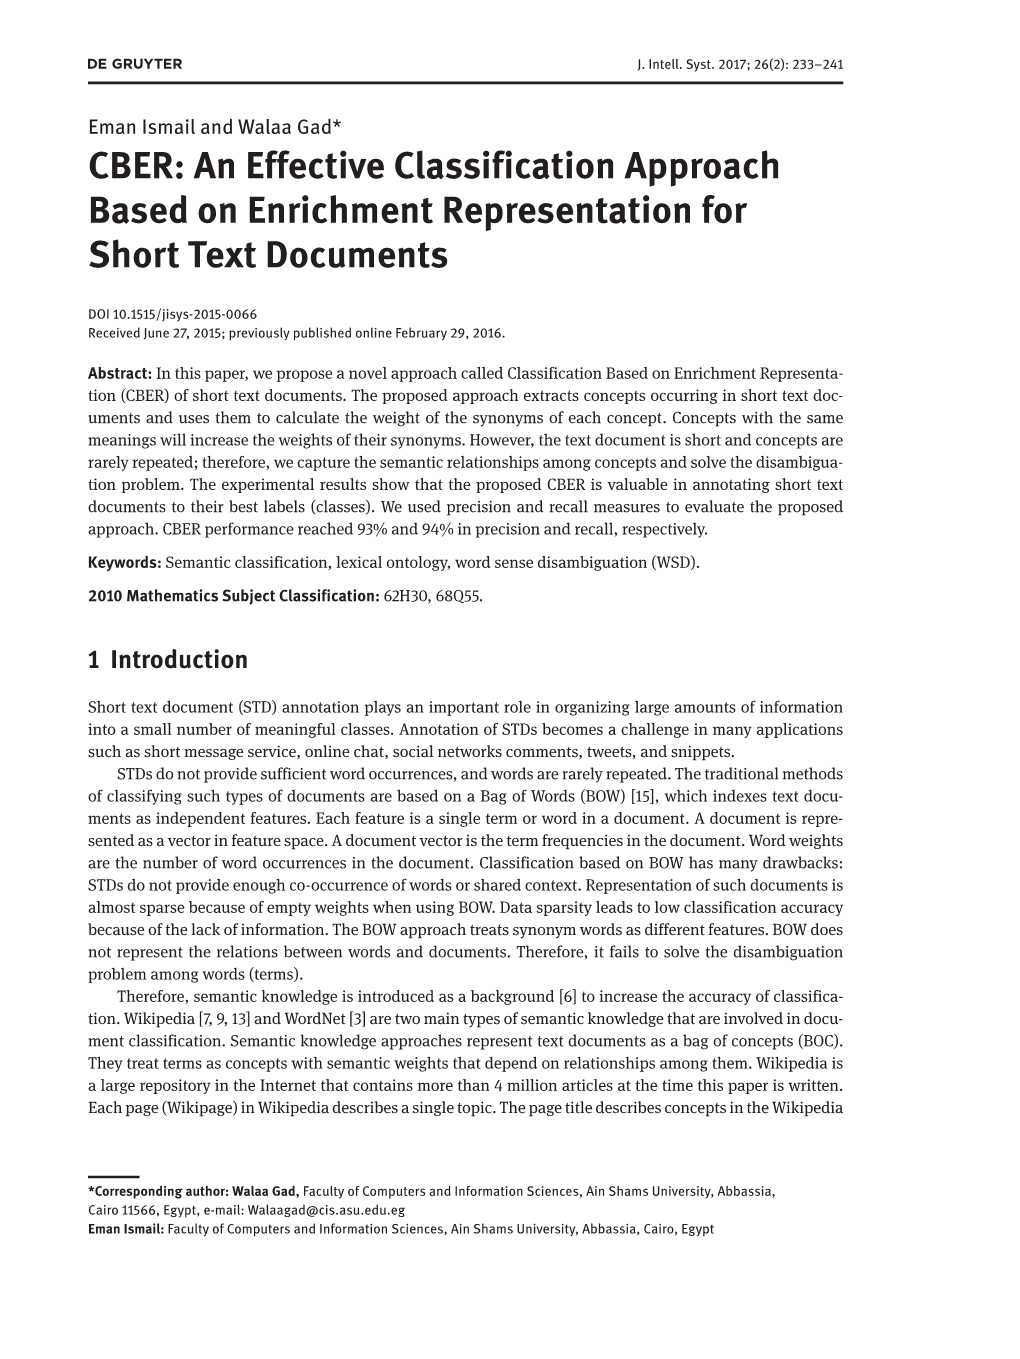 CBER: an Effective Classification Approach Based on Enrichment Representation for Short Text Documents